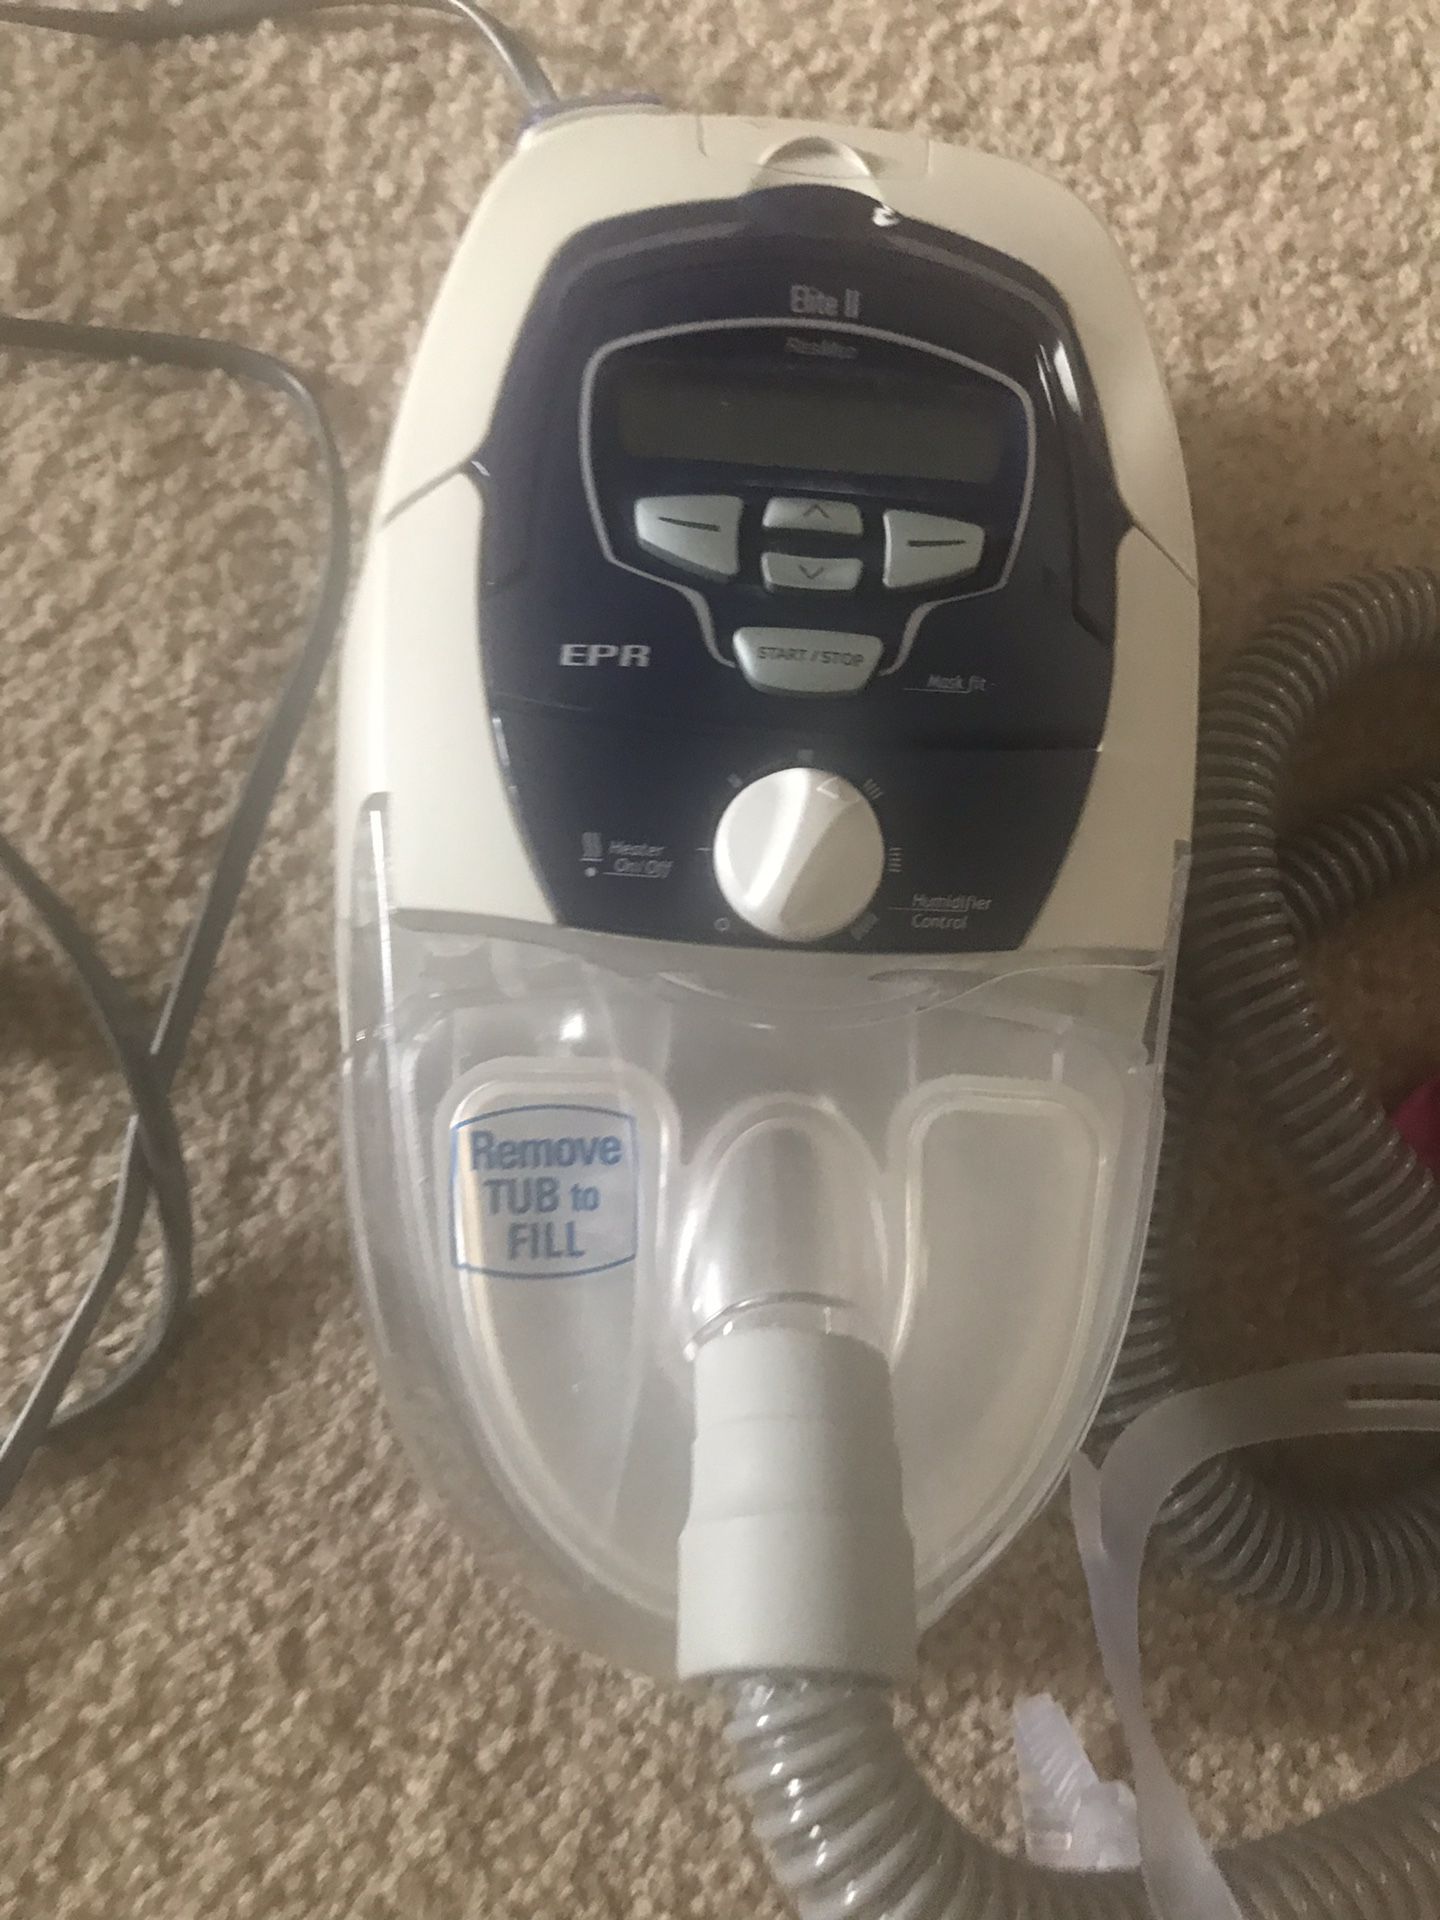 CPAP machine with hoses and masks - Elite II